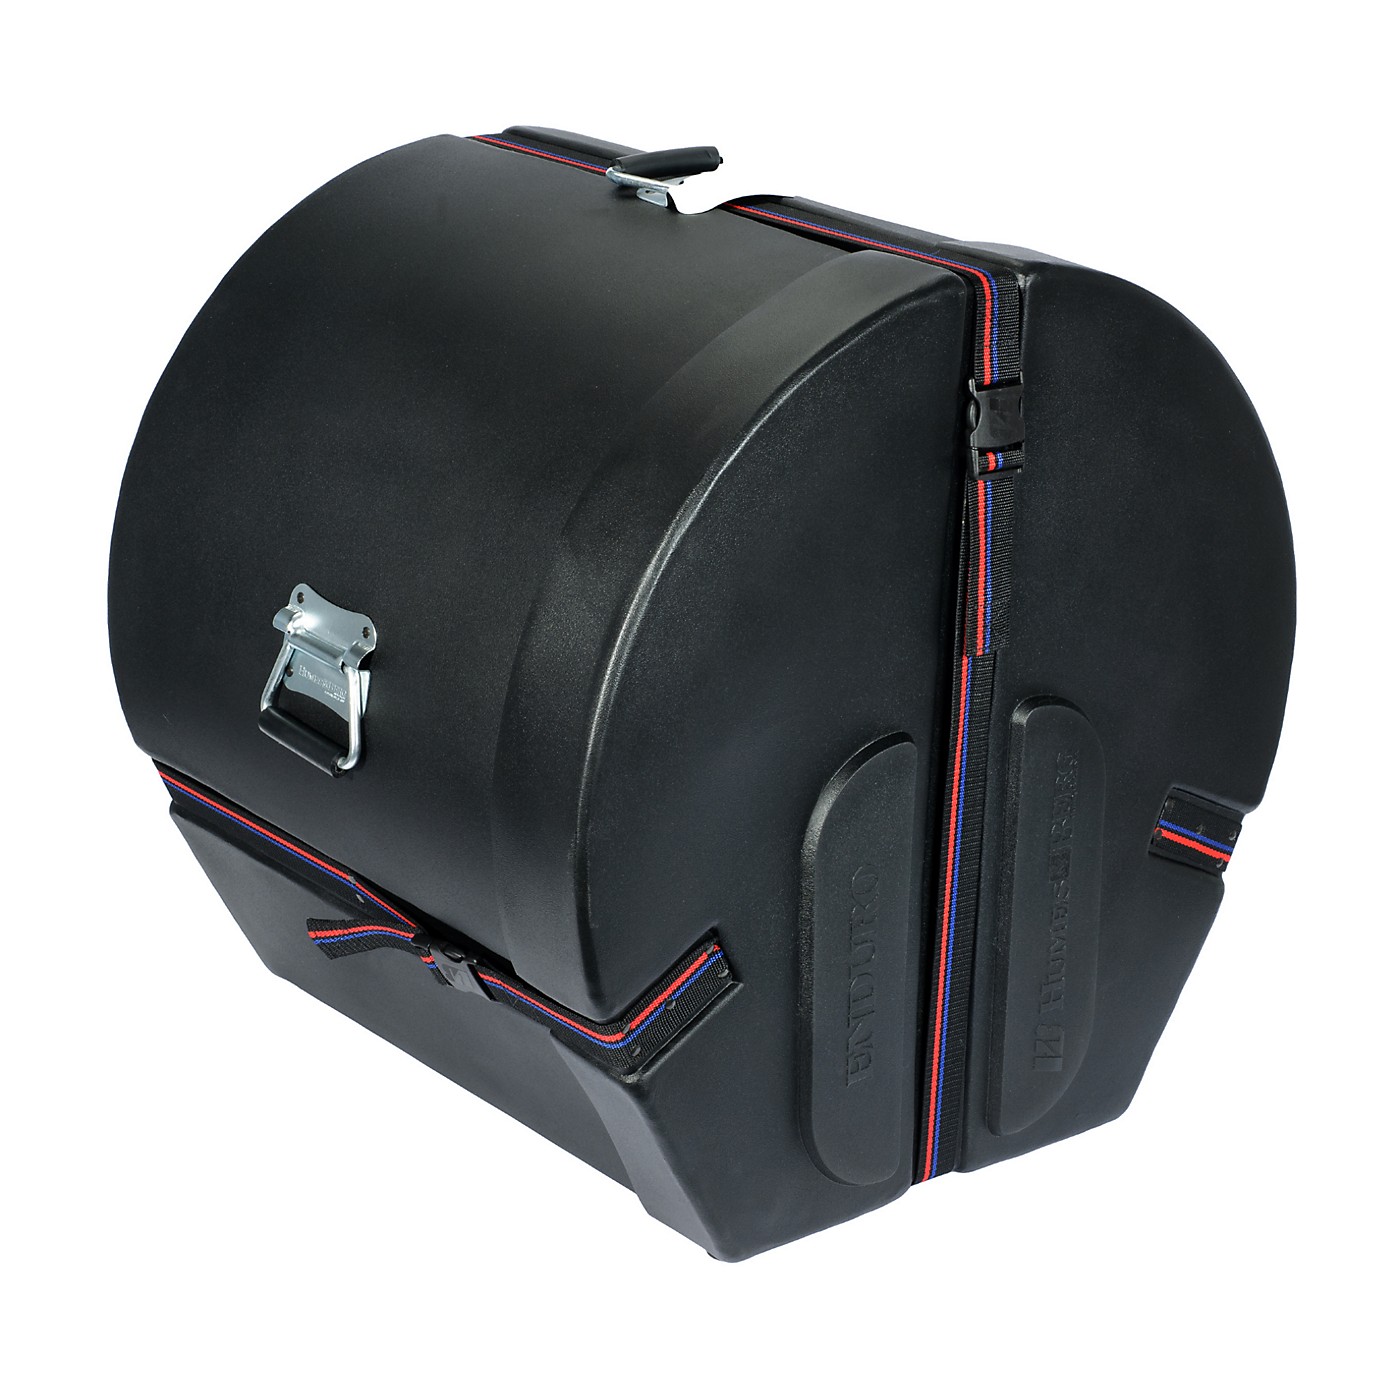 Humes & Berg Enduro Bass Drum Case with Foam thumbnail